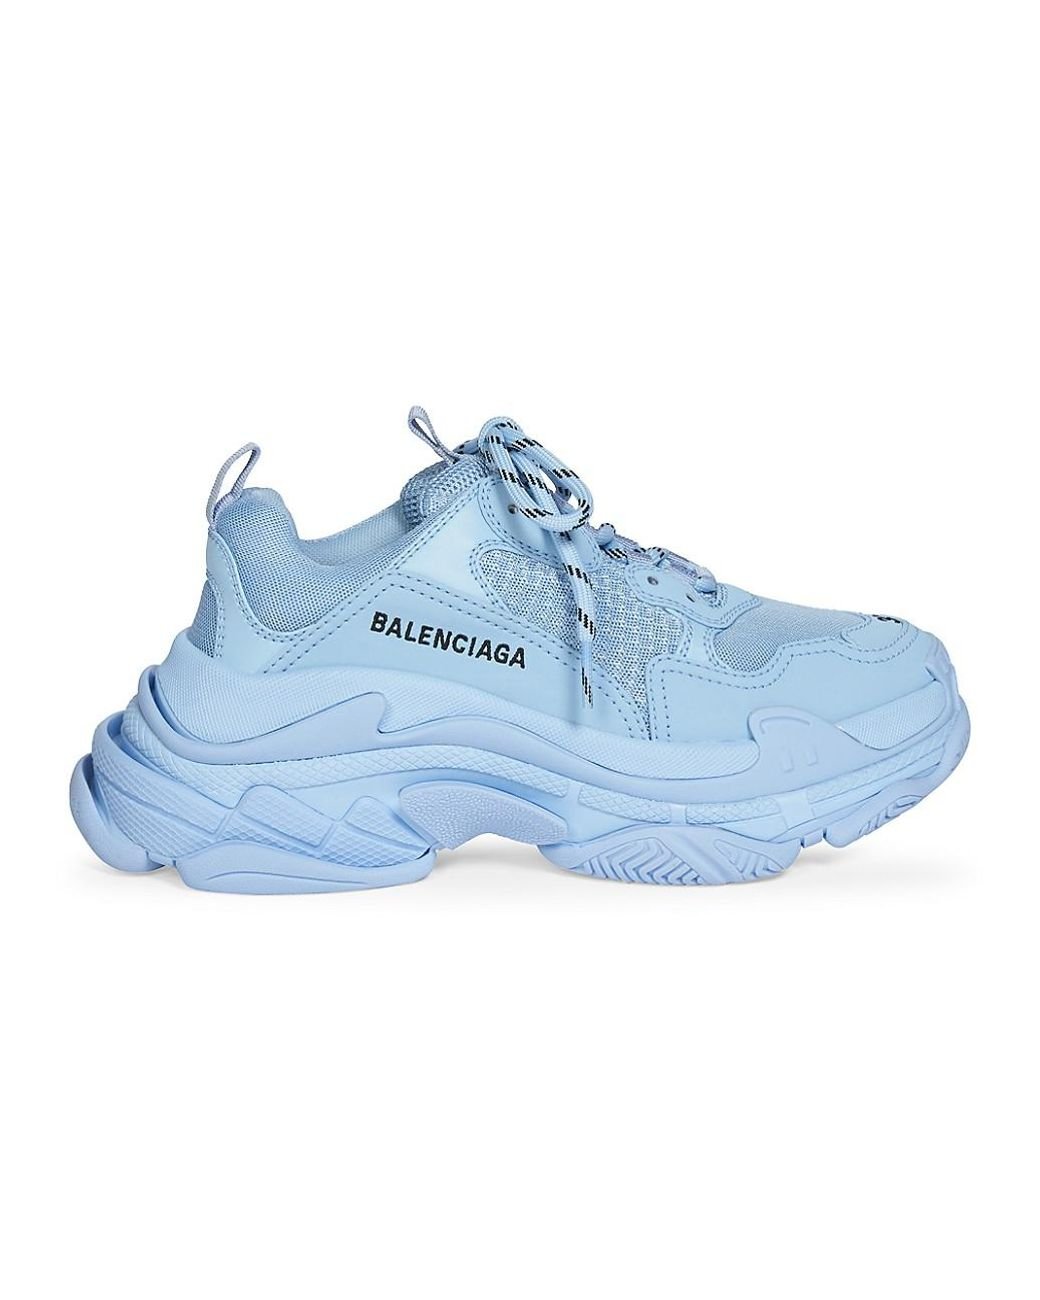 Balenciaga Synthetic Triple S Sneaker in Light Blue (Blue) - Save 3% - Lyst